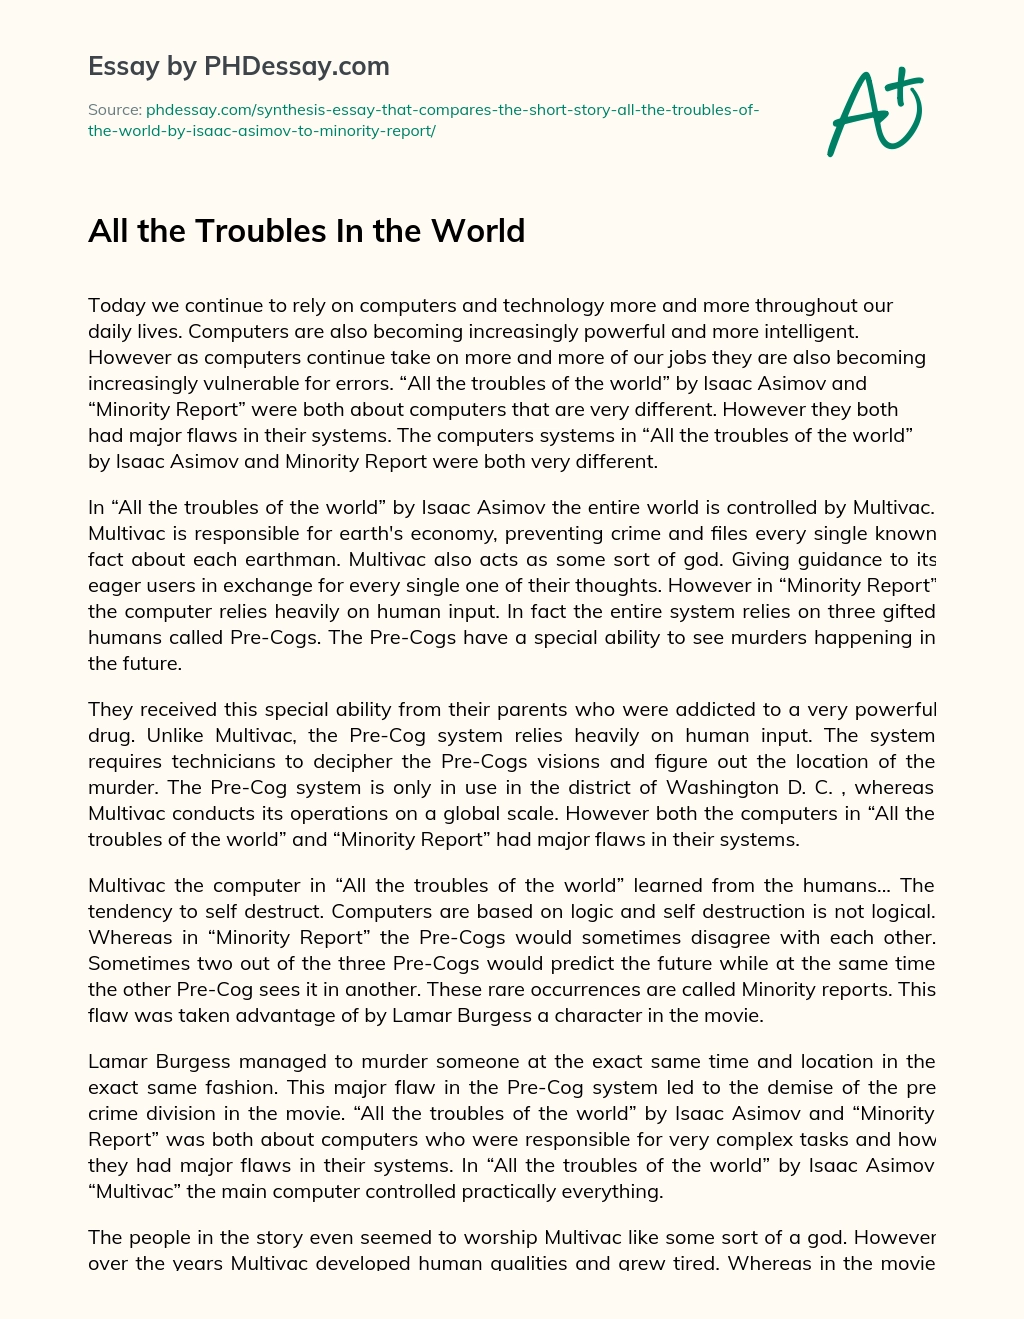 All the Troubles In the World essay